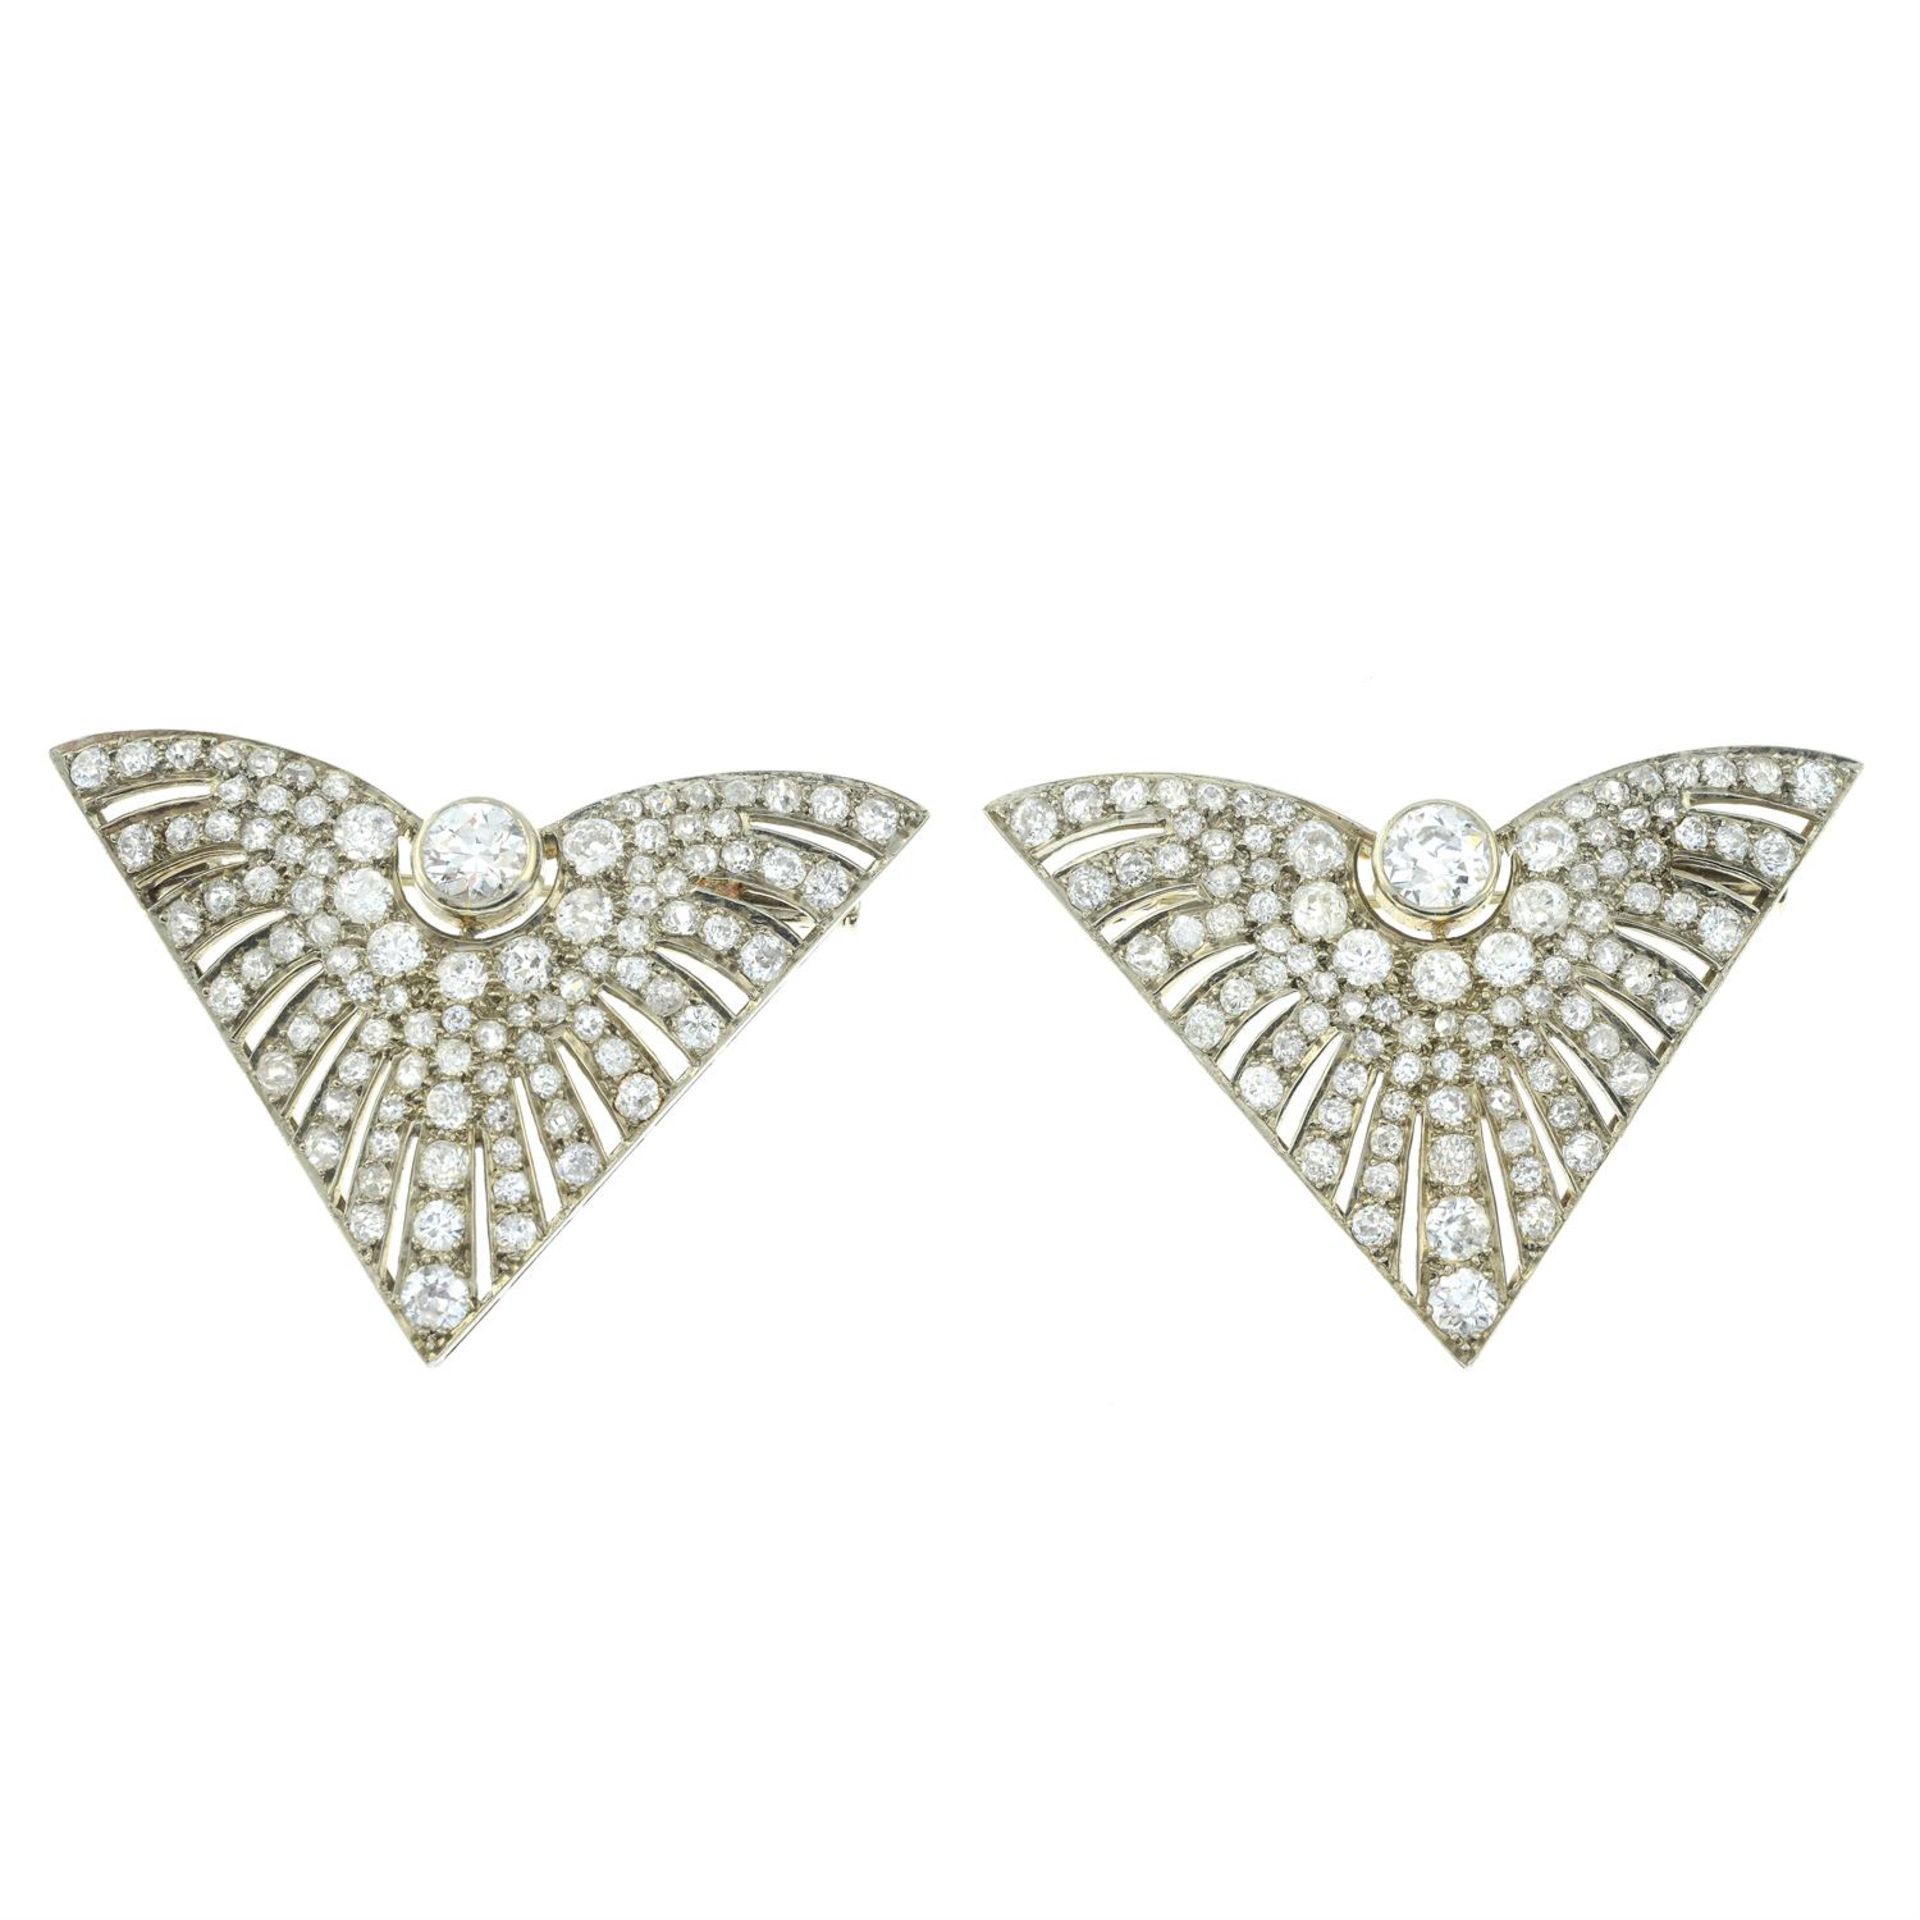 A pair of mid 20th century gold diamond geometric brooches. - Image 2 of 4